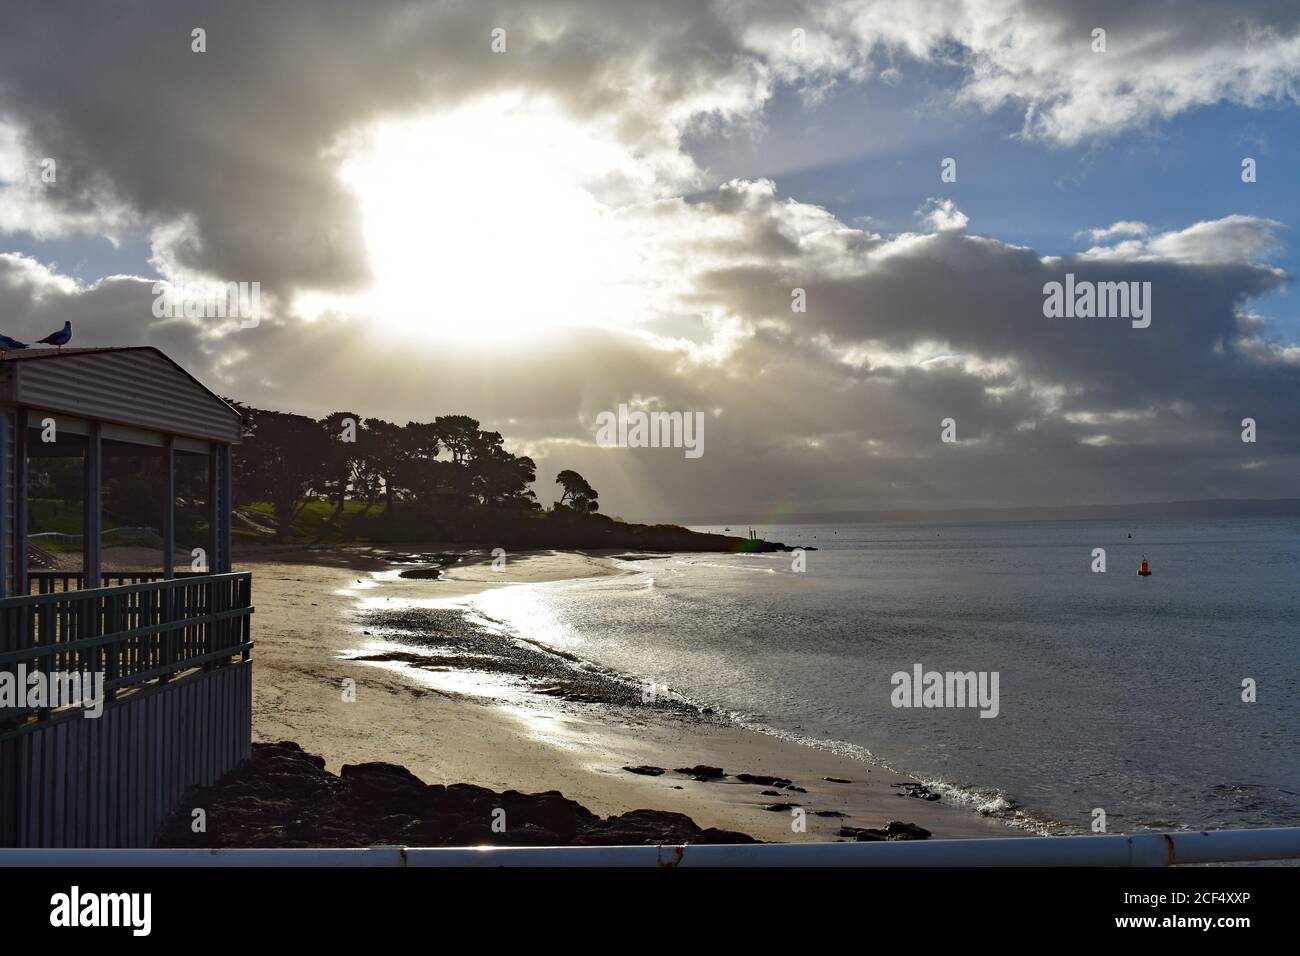 Cowes Beach as seen from Cowes Pier on Phillip Island, Australia.  The sun is beginning to set and it is reflected in the wet sand and the sea. Stock Photo